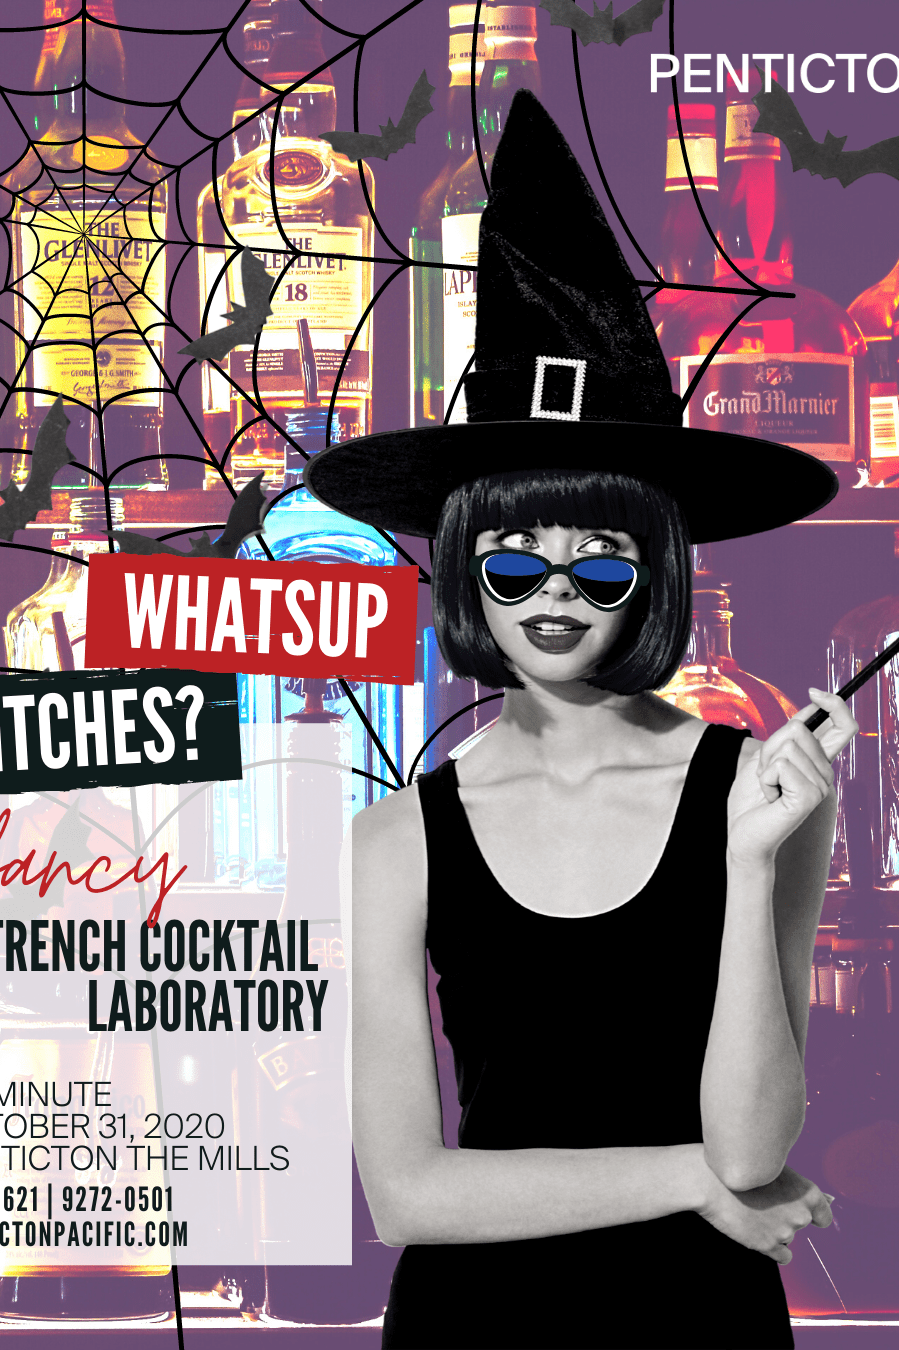 Discover PENTICTON FANCY French Cocktail Laboratory【黑色萬聖節】法式雞尾酒工作坊 online at PENTICTON